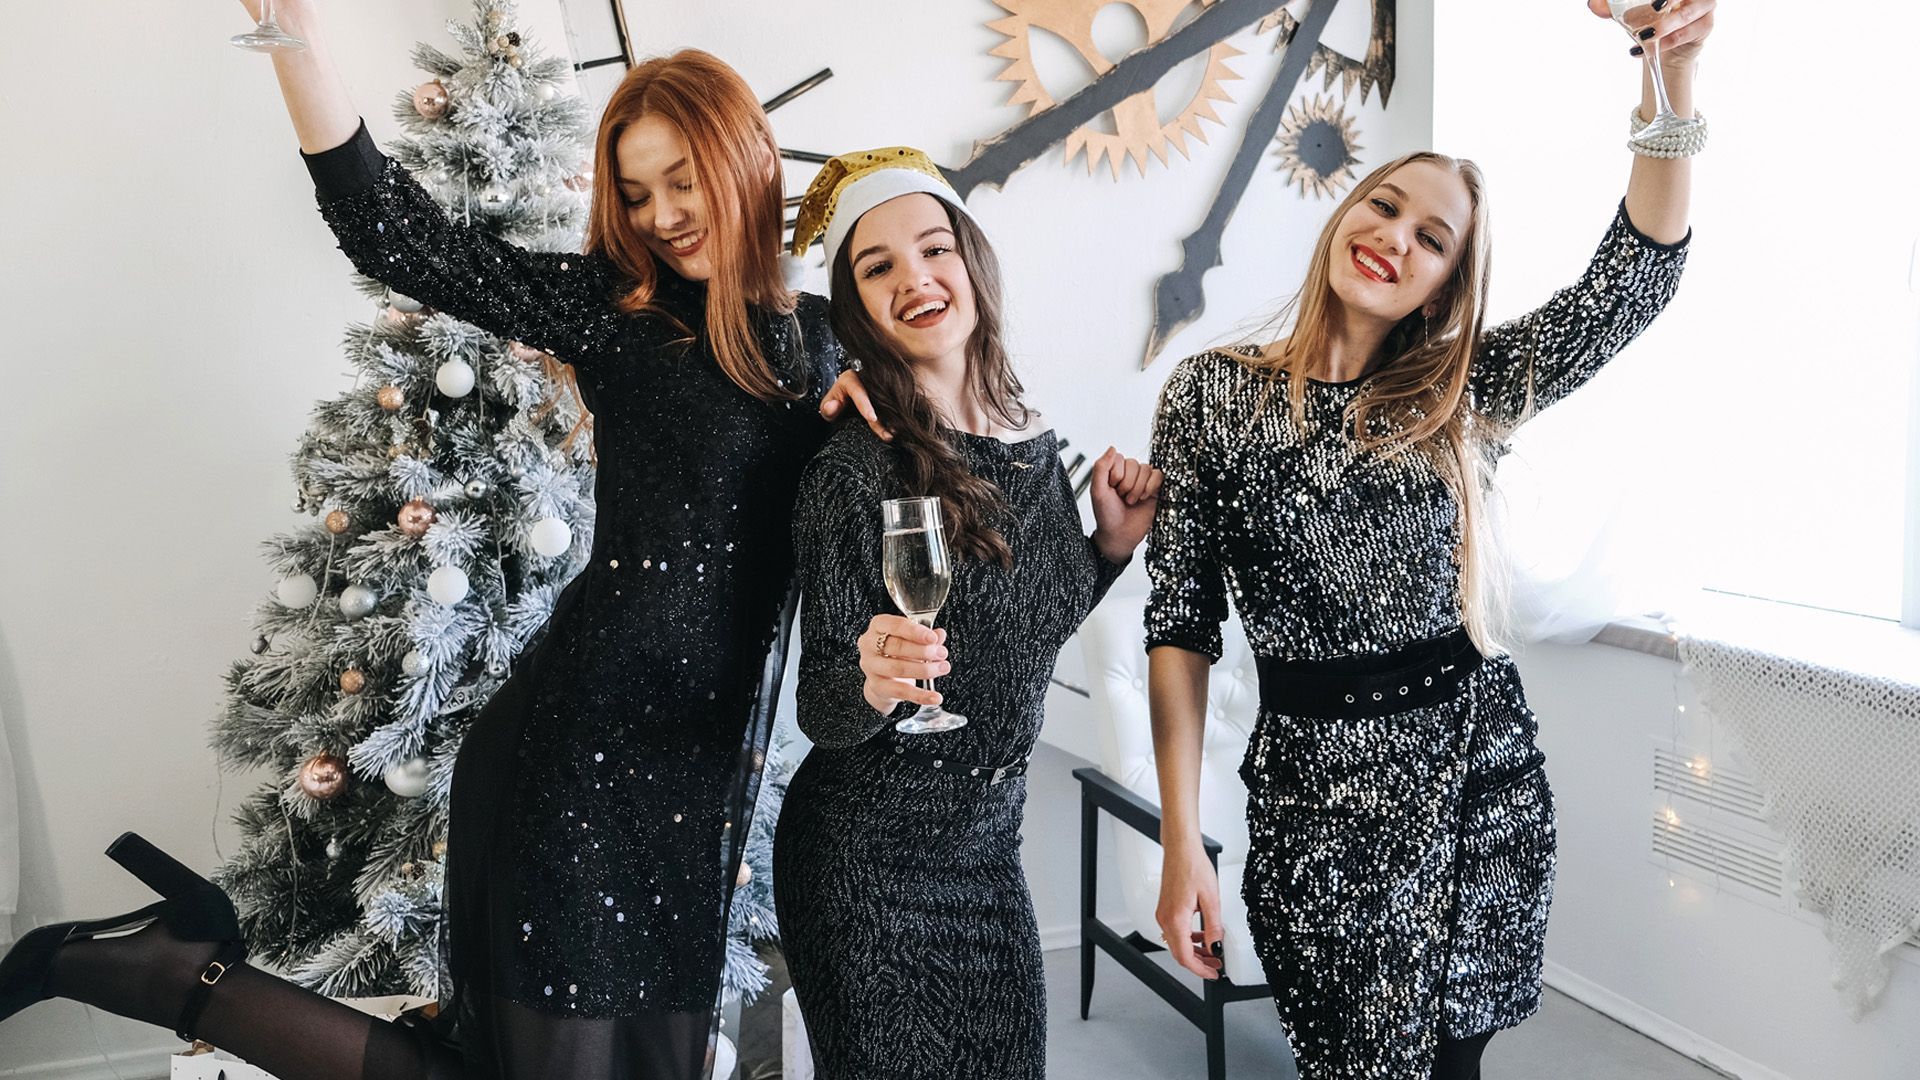 Christmas party dress code: The most important styling rules